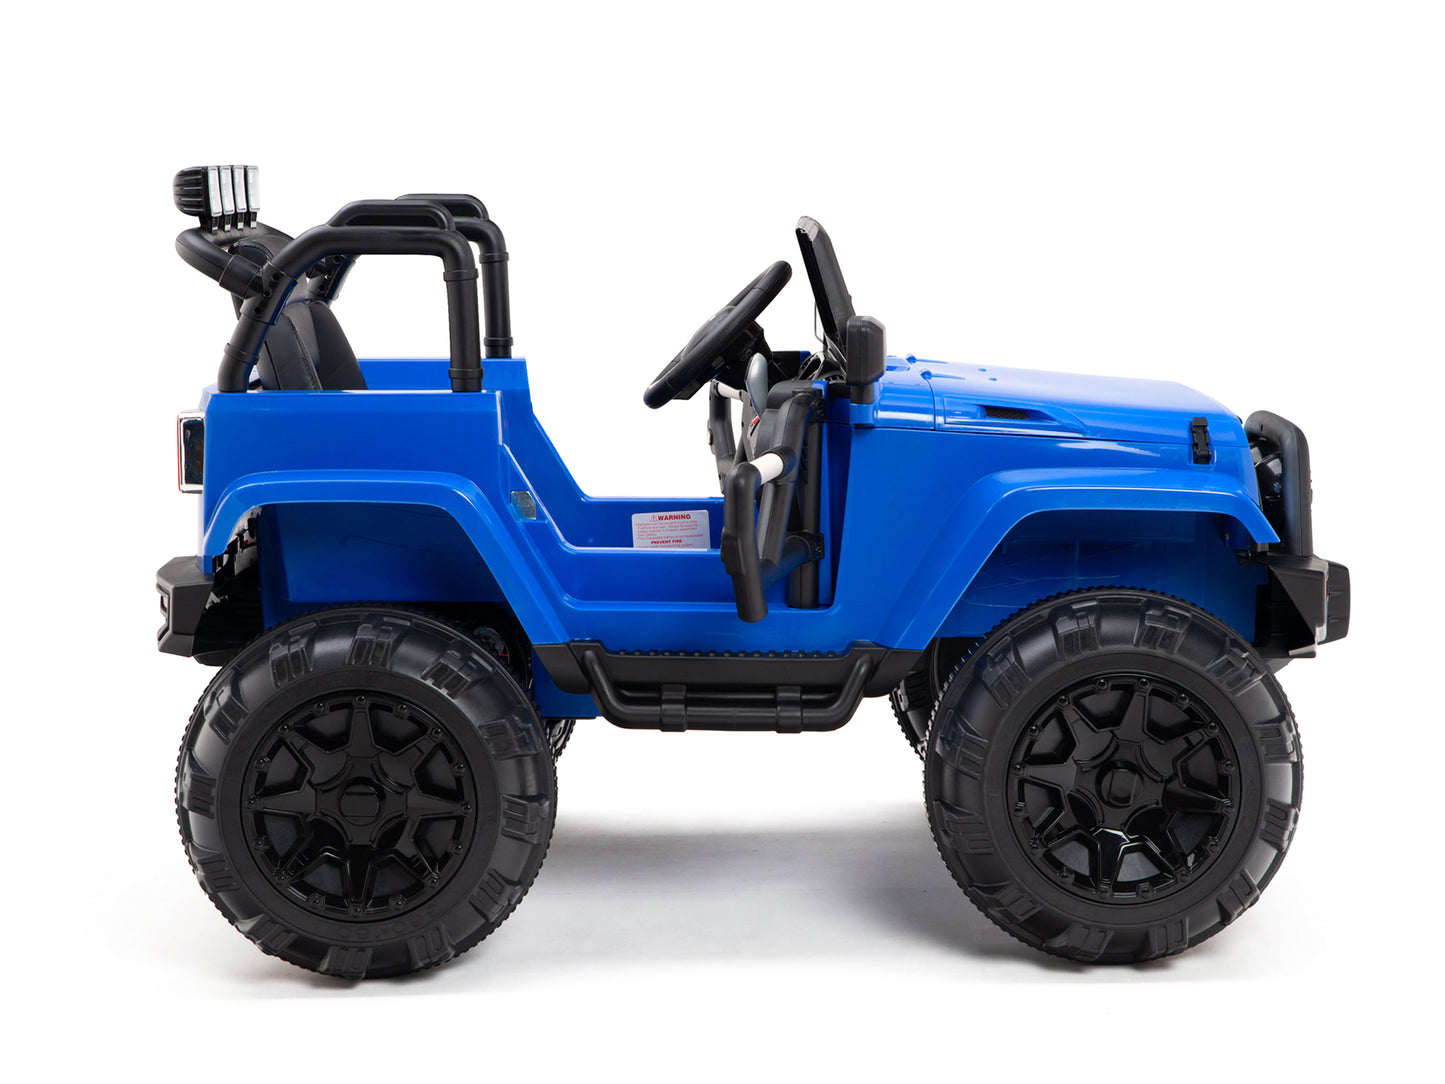 12V MP3 Kids Ride on Truck R/C Remote Control, Lights Radio and Tunes - Blue